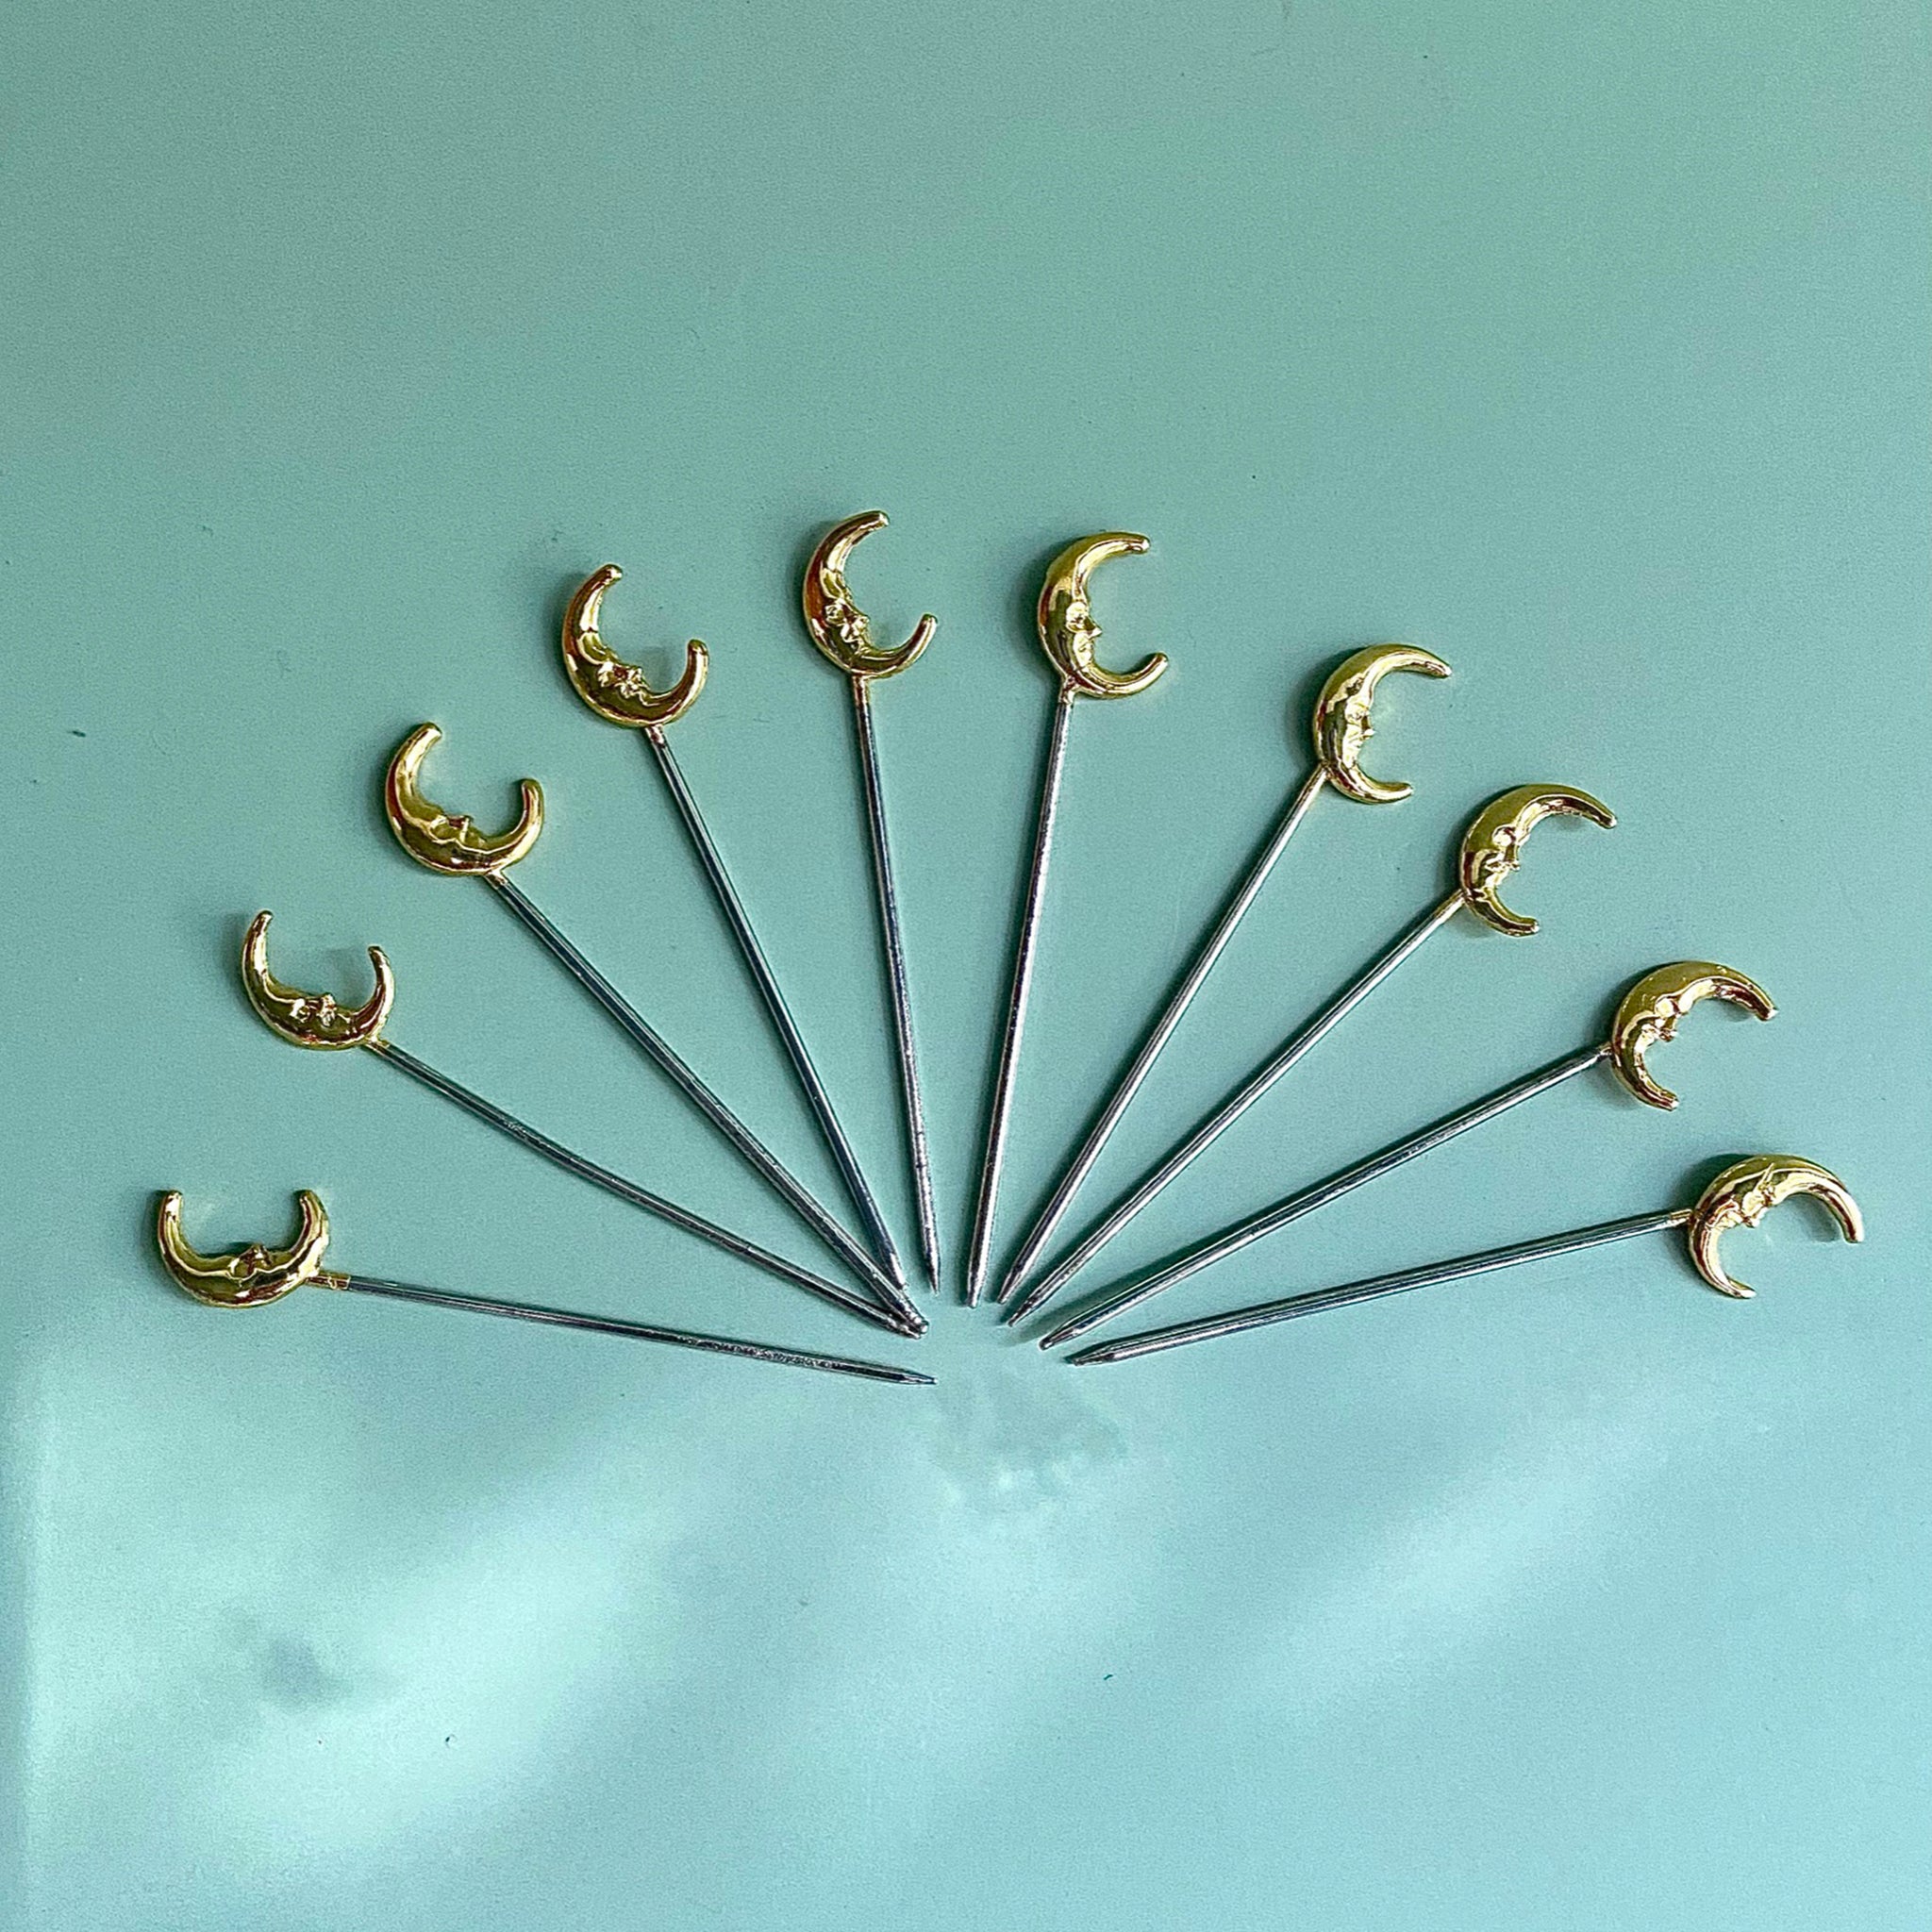 Moon Headed Sewing Pins – Witches by Helena Garcia